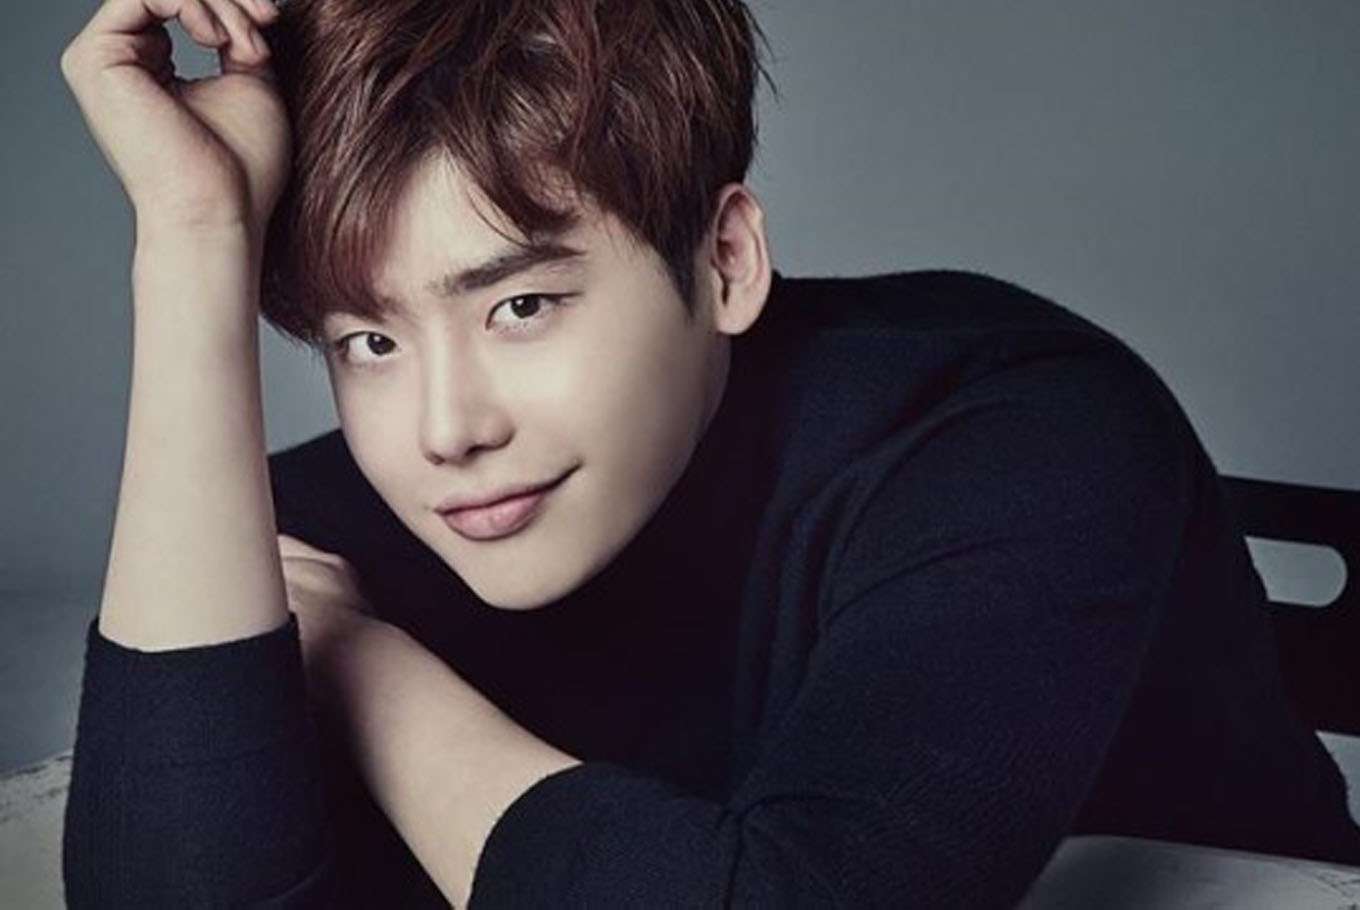 Lee Jong Suk Biography: Nationality, Girlfriend, Age, Net Worth, Wikipedia, Parents, Movies, TV Shows, Instagram